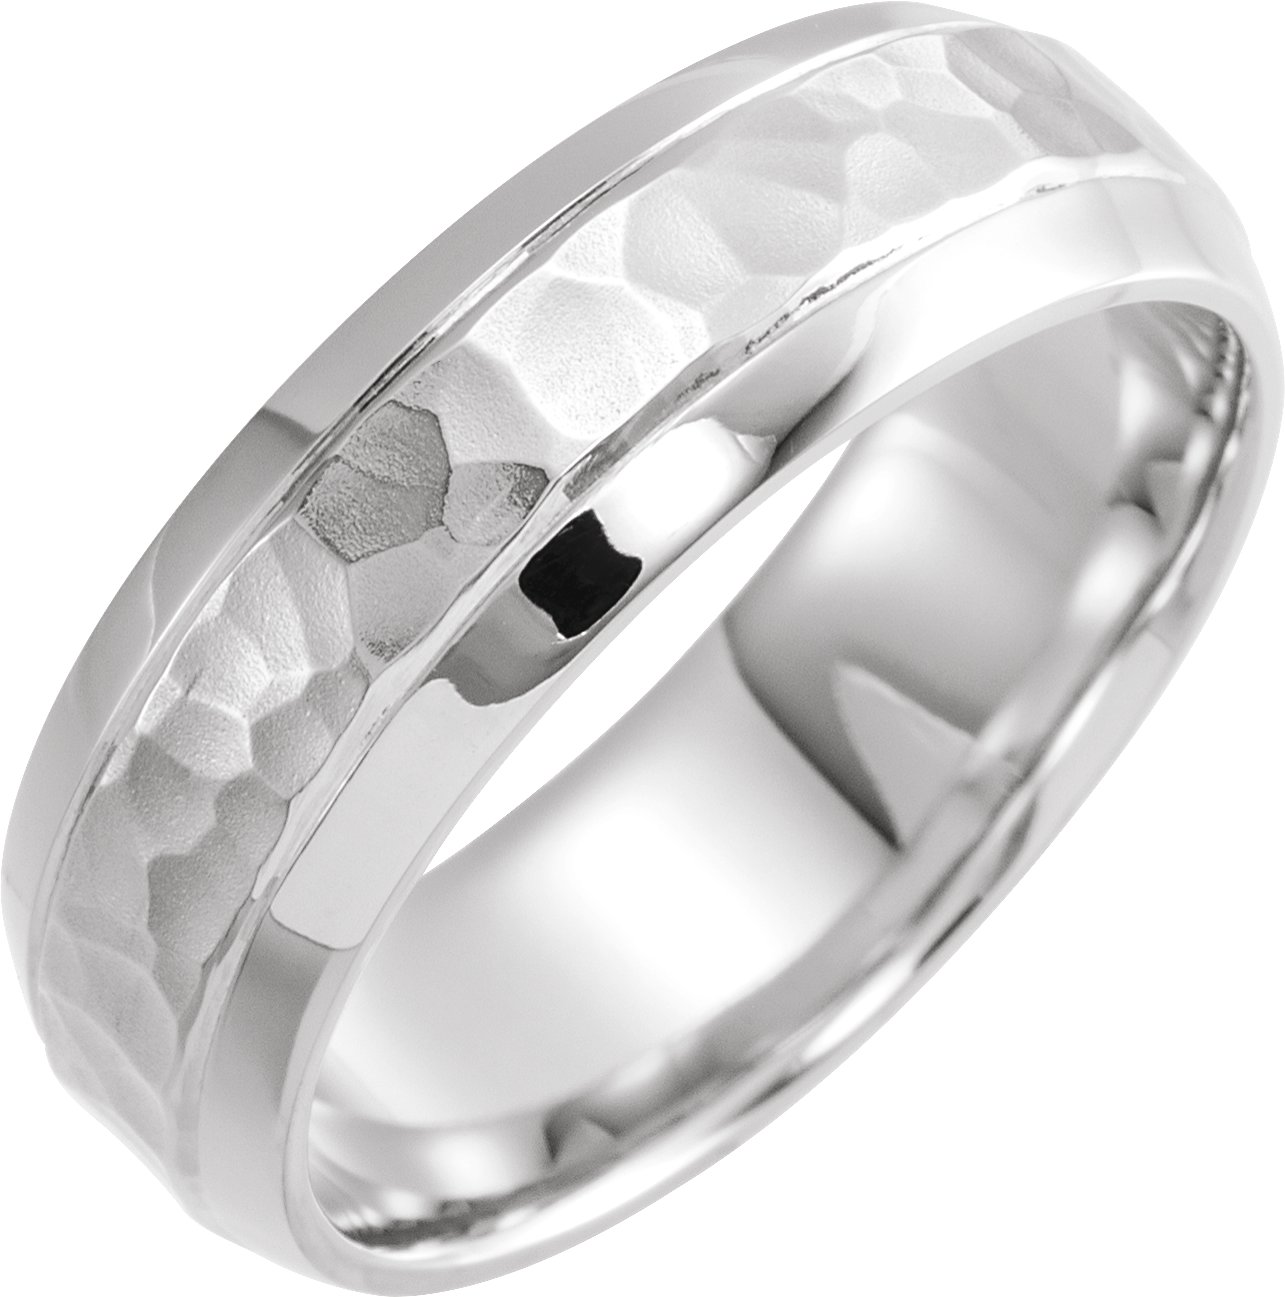 Platinum 7 mm Beveled-Edge Band with Hammered Texture Size 10